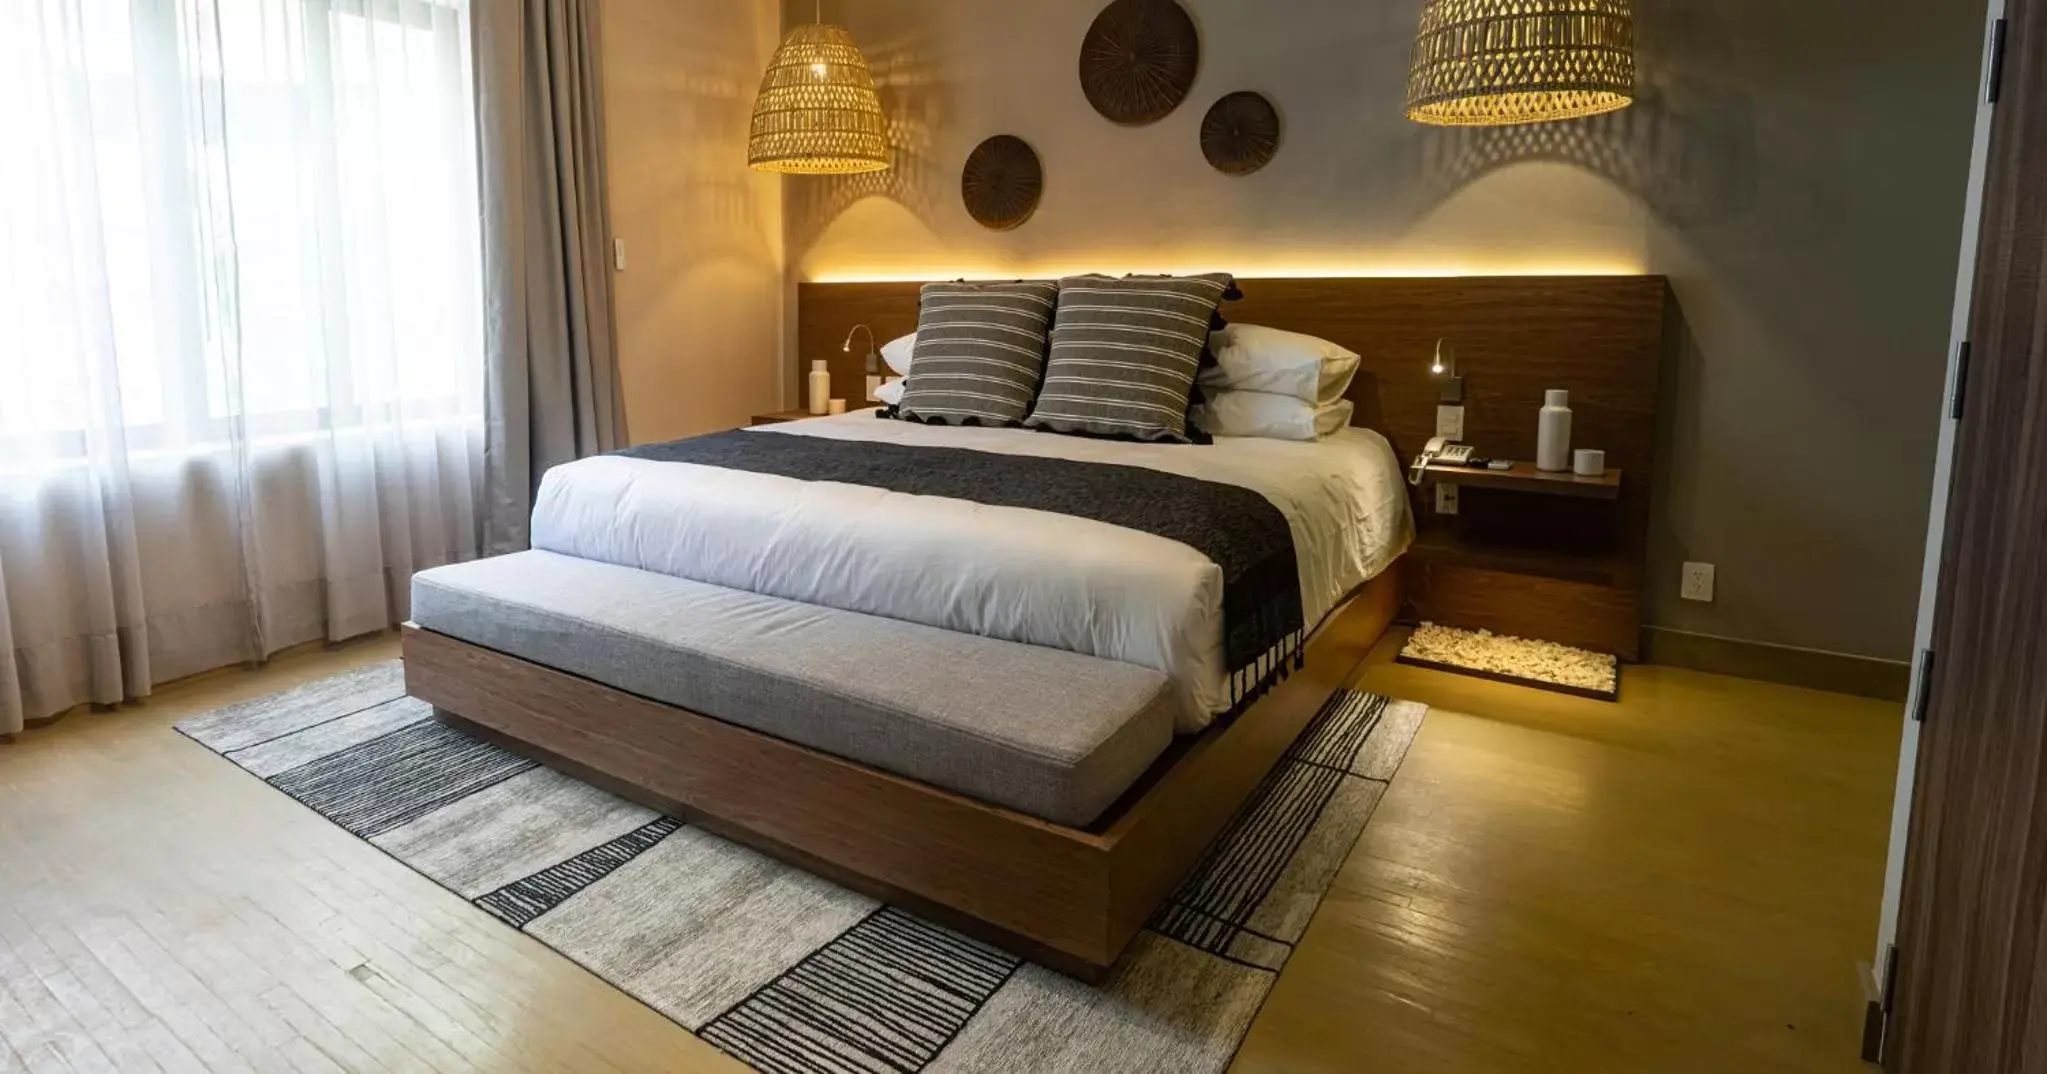 Bed, Room Photo in Agata Hotel Boutique & Spa